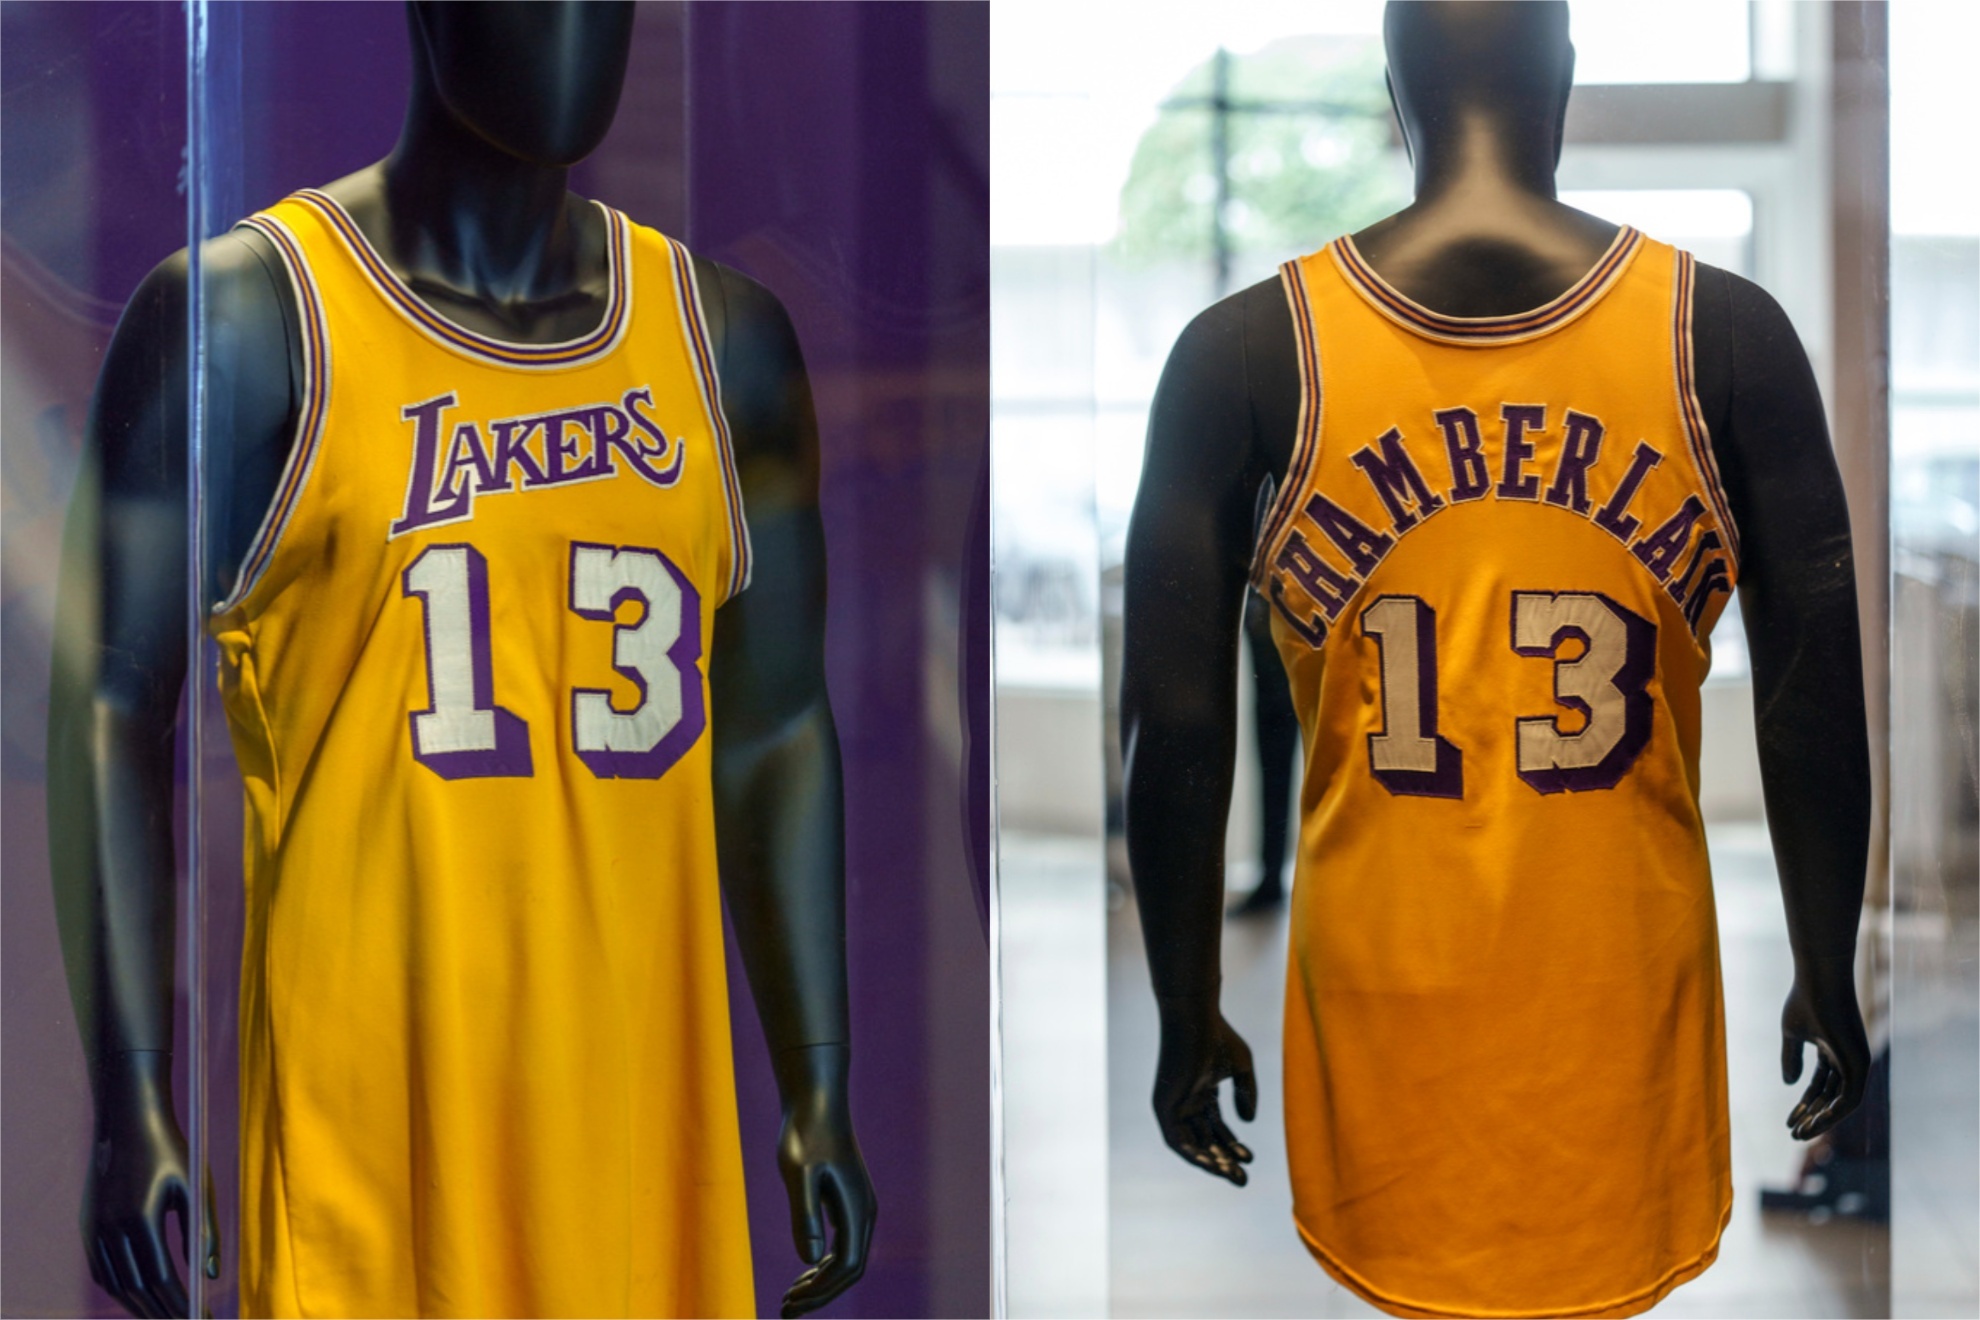 Wilt Chamberlain's game-worn jersey from 1972 set a new auction record